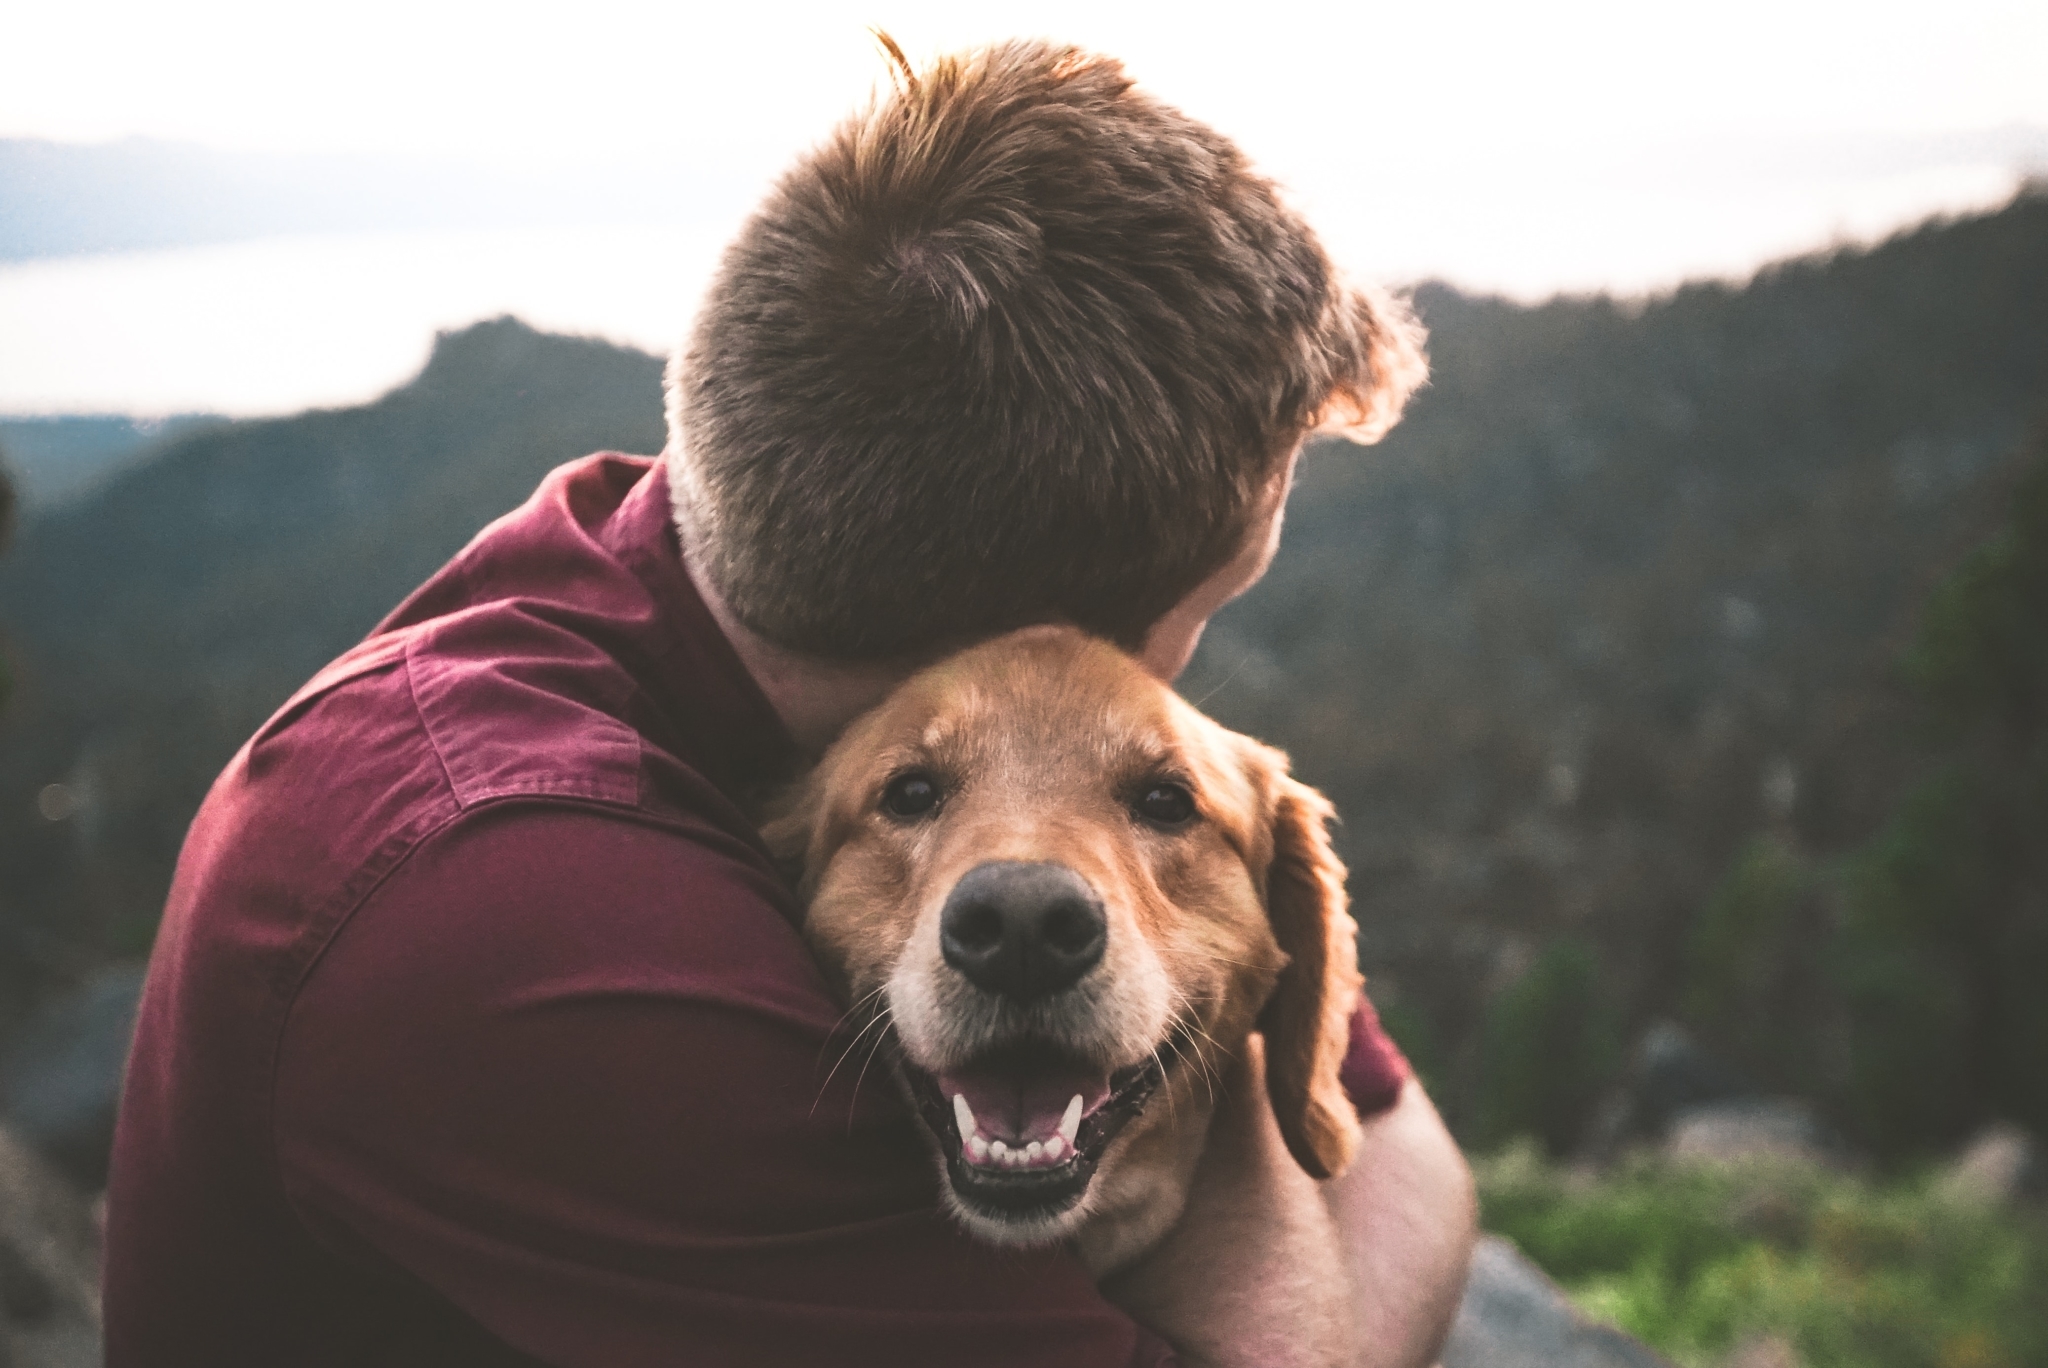 A man hugging his golden retriever dog in nature